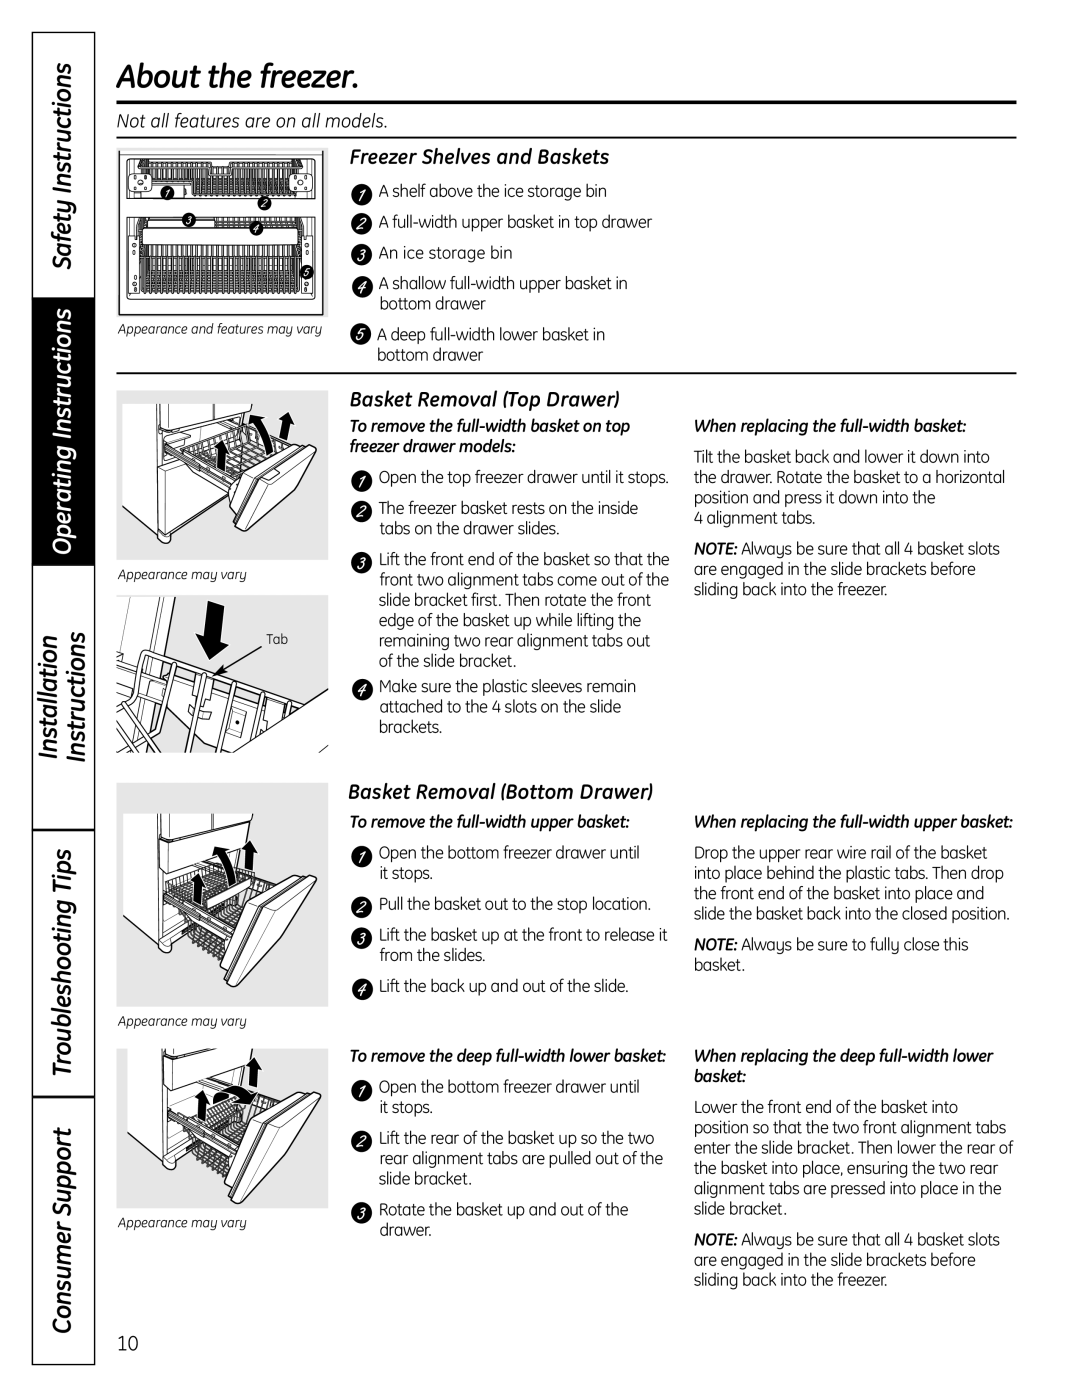 GE 225D1804P001 About the freezer, Instructions Safety Instructions, Operating, Troubleshooting Tips, Consumer Support 